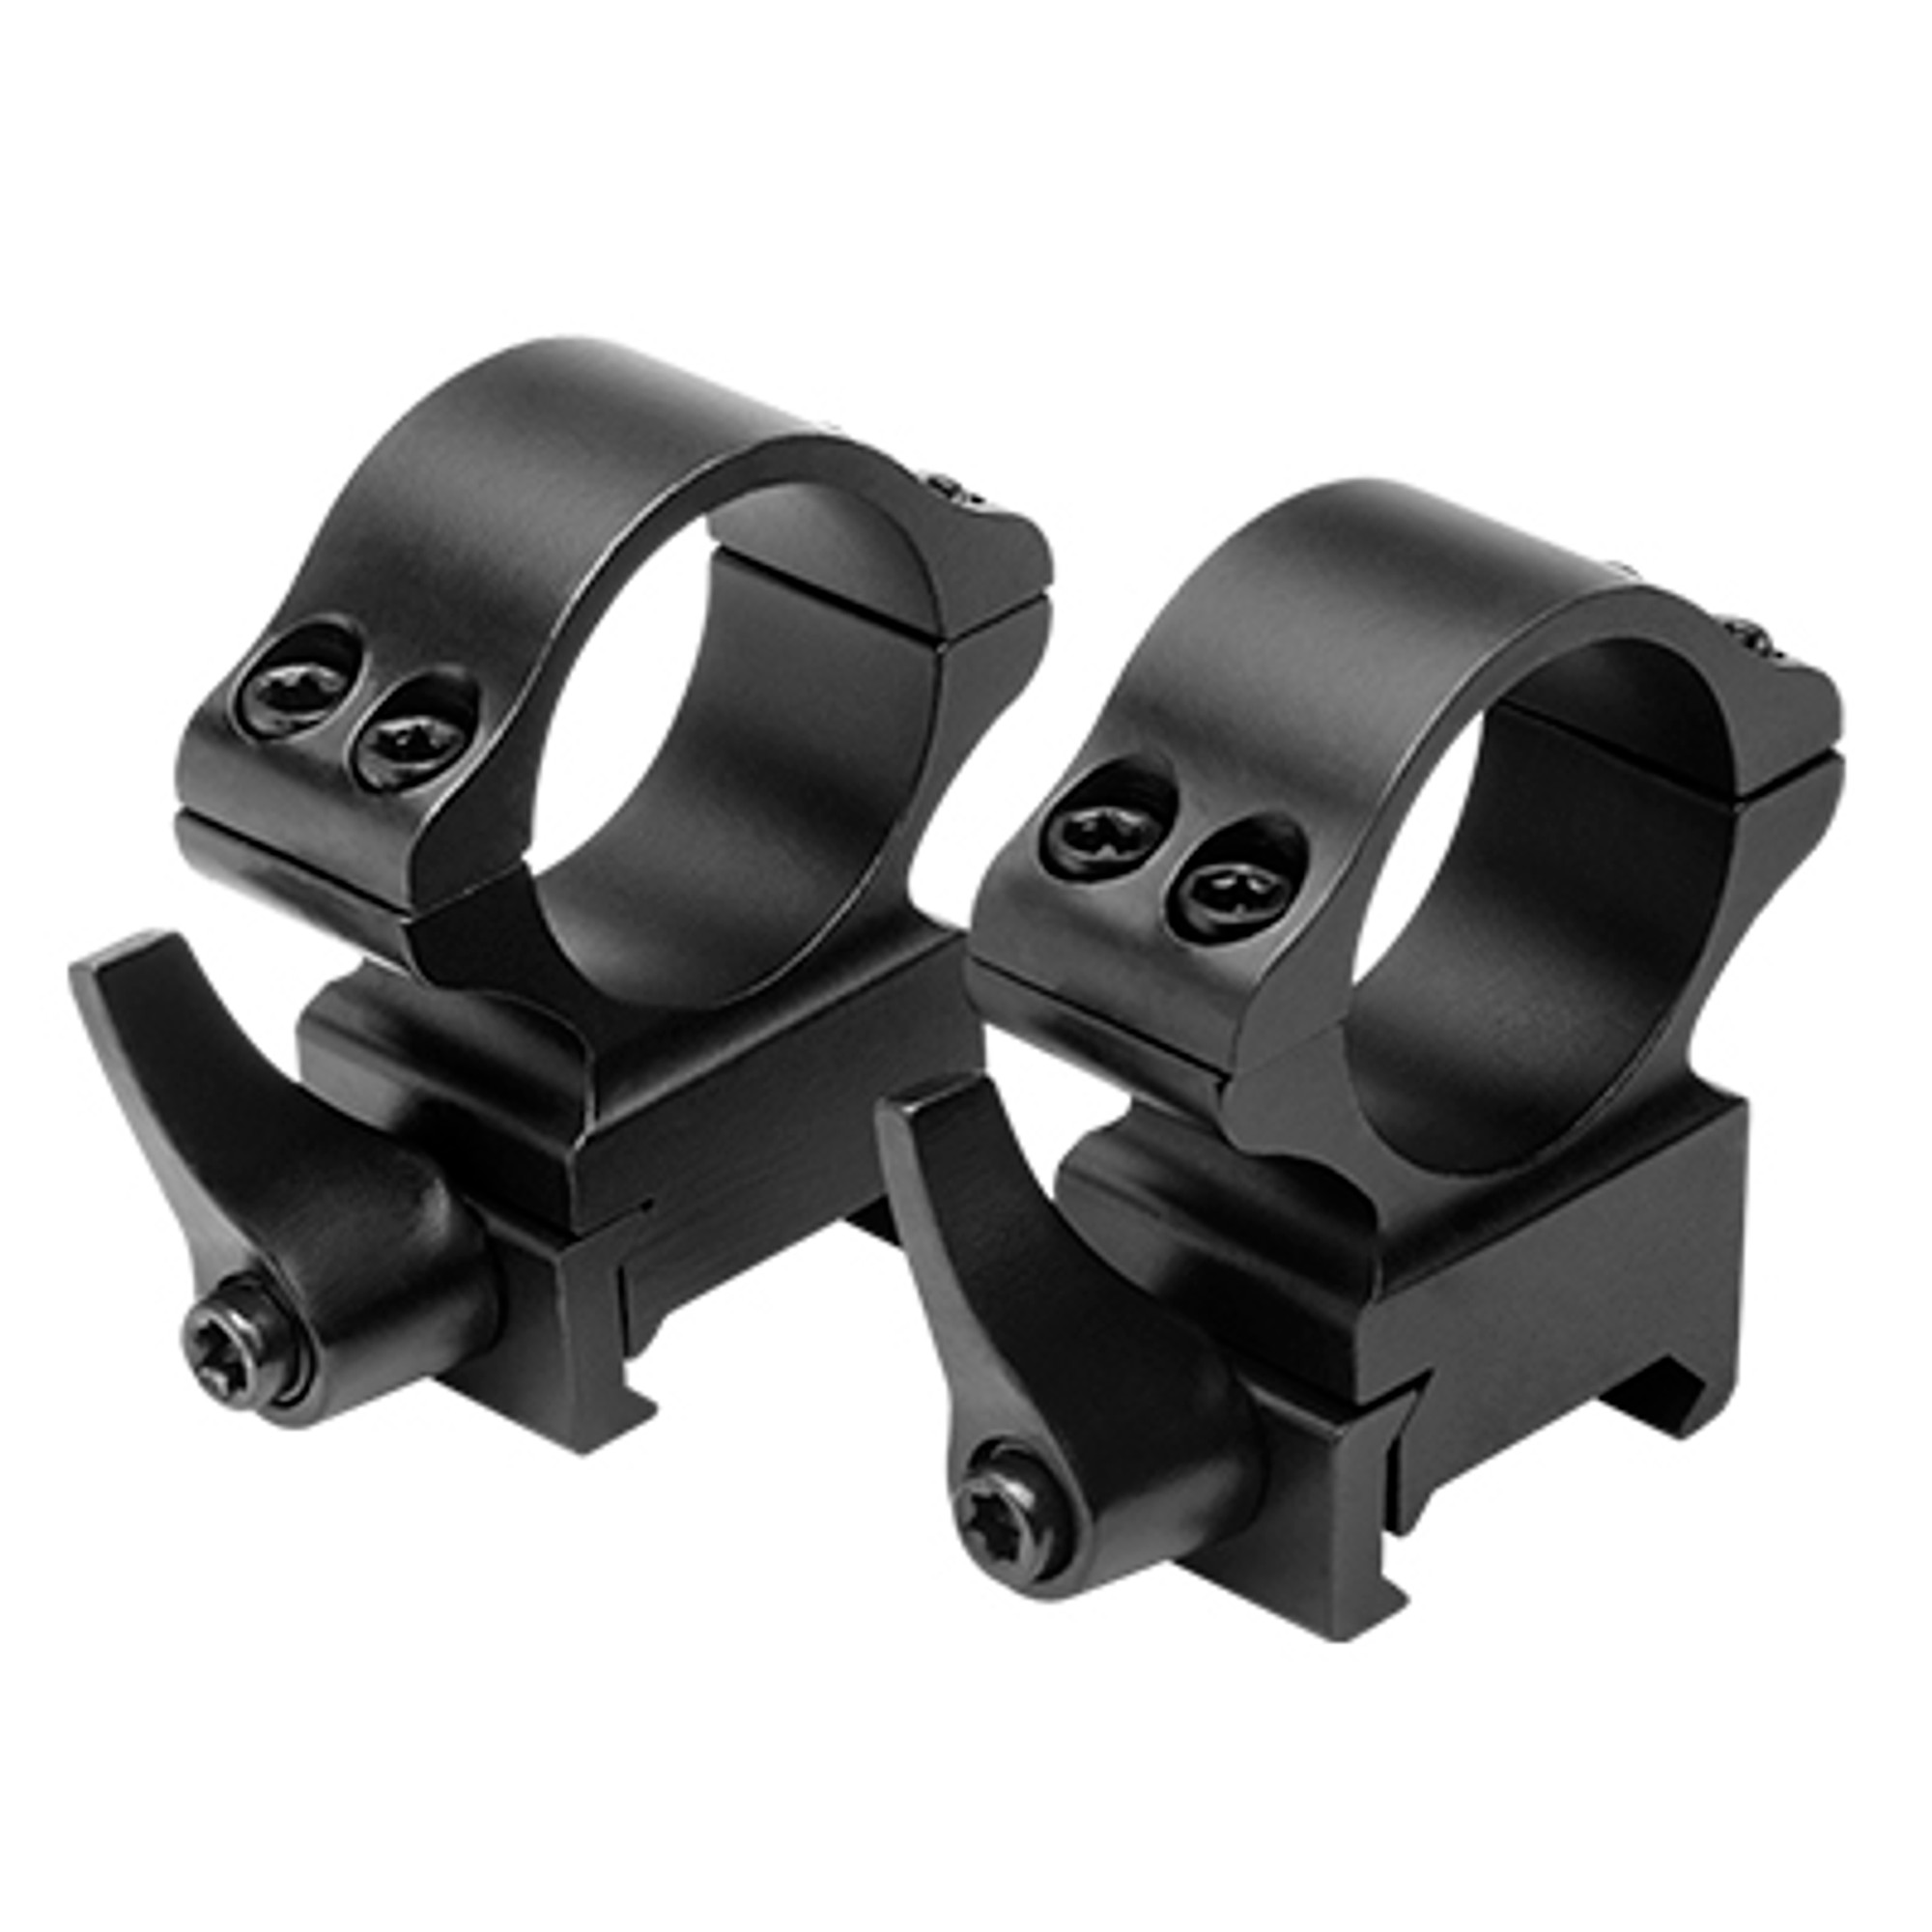 NcStar 1" X 1.0"H Steel Quick Release Rings-Black